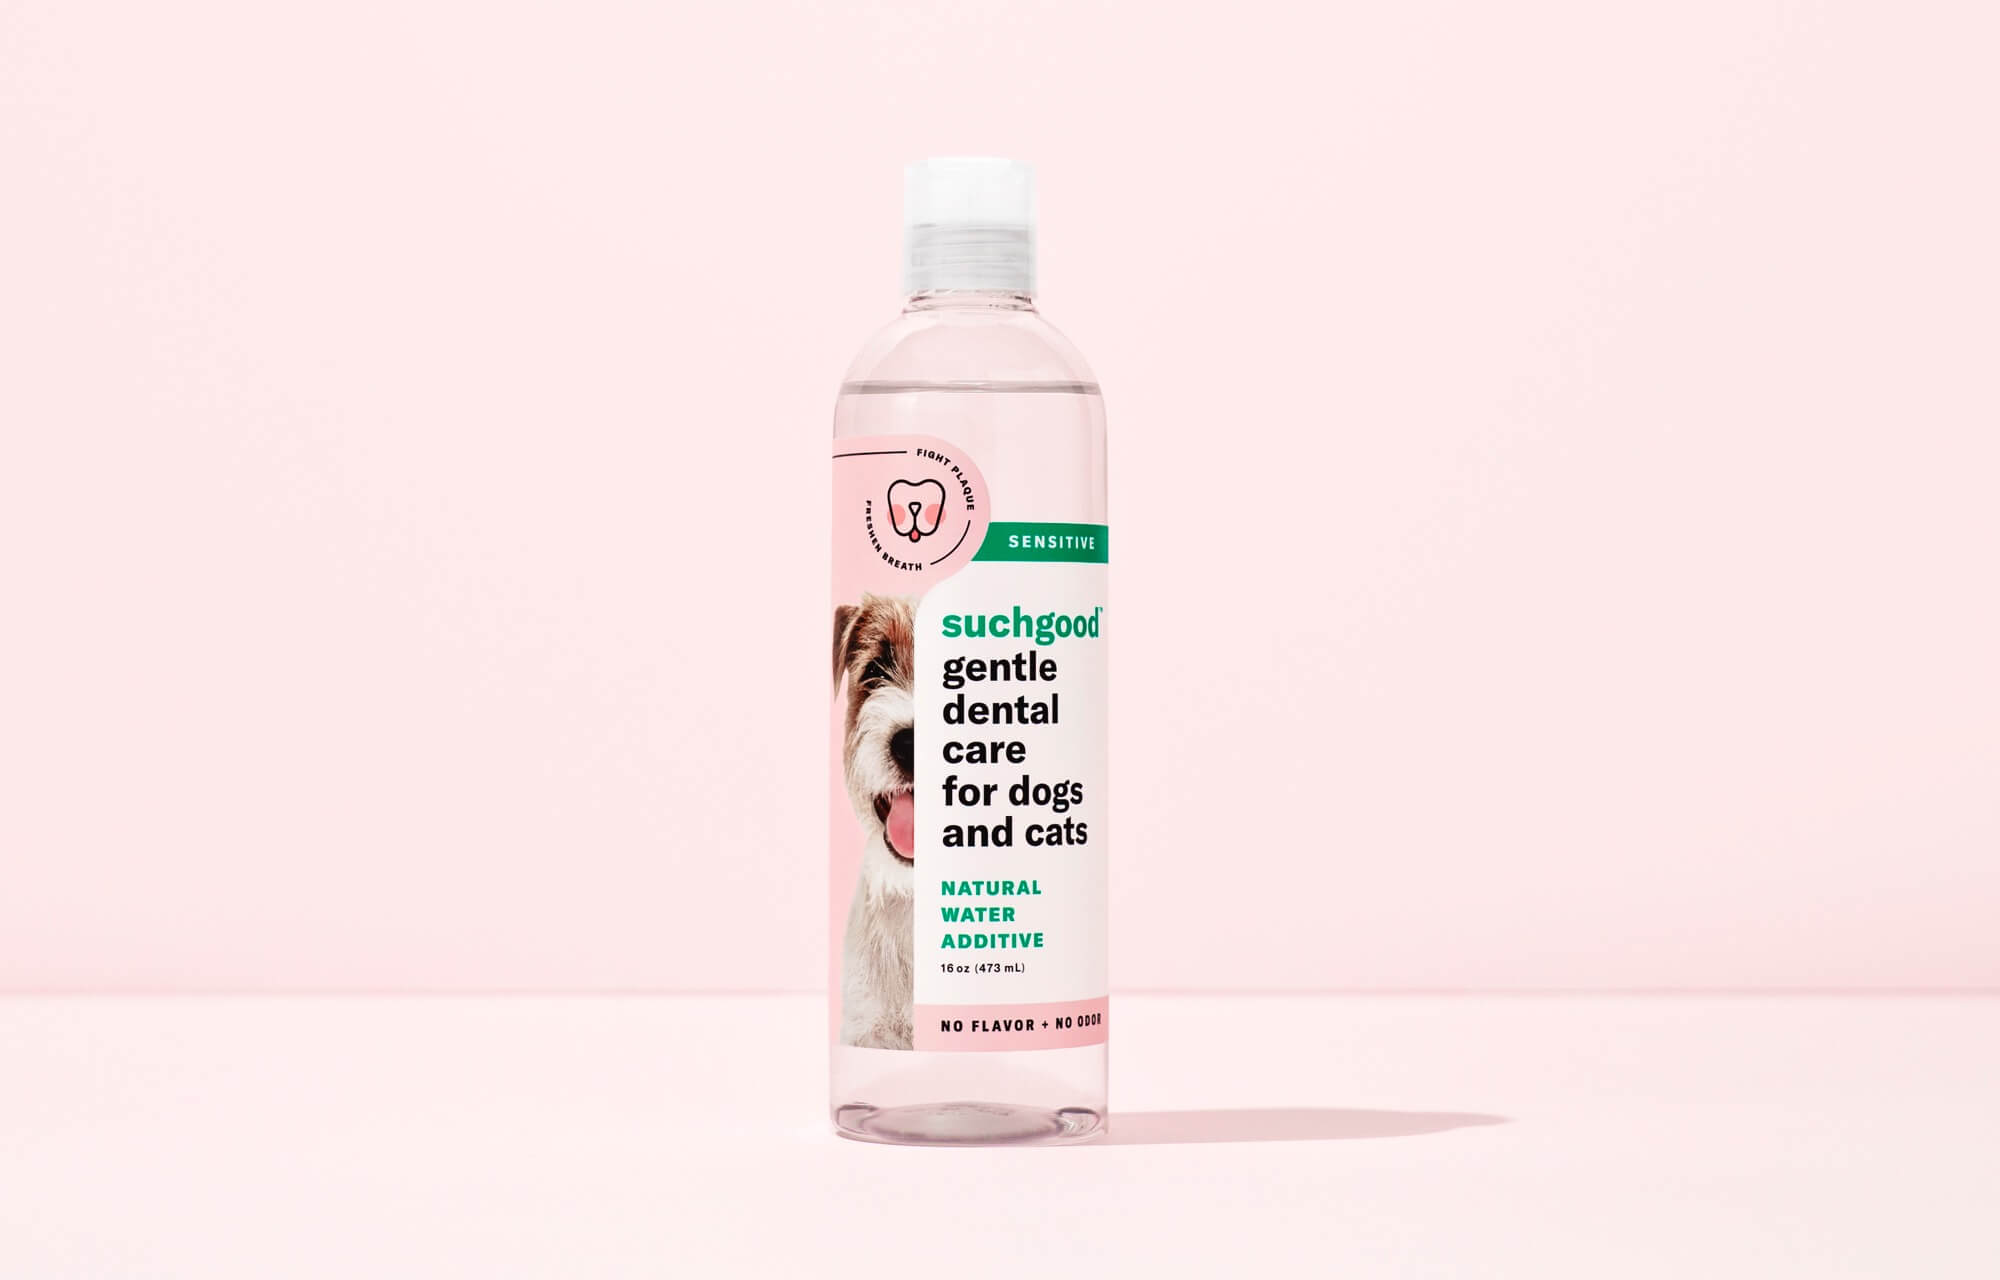 suchgood-pet-dental-care-products